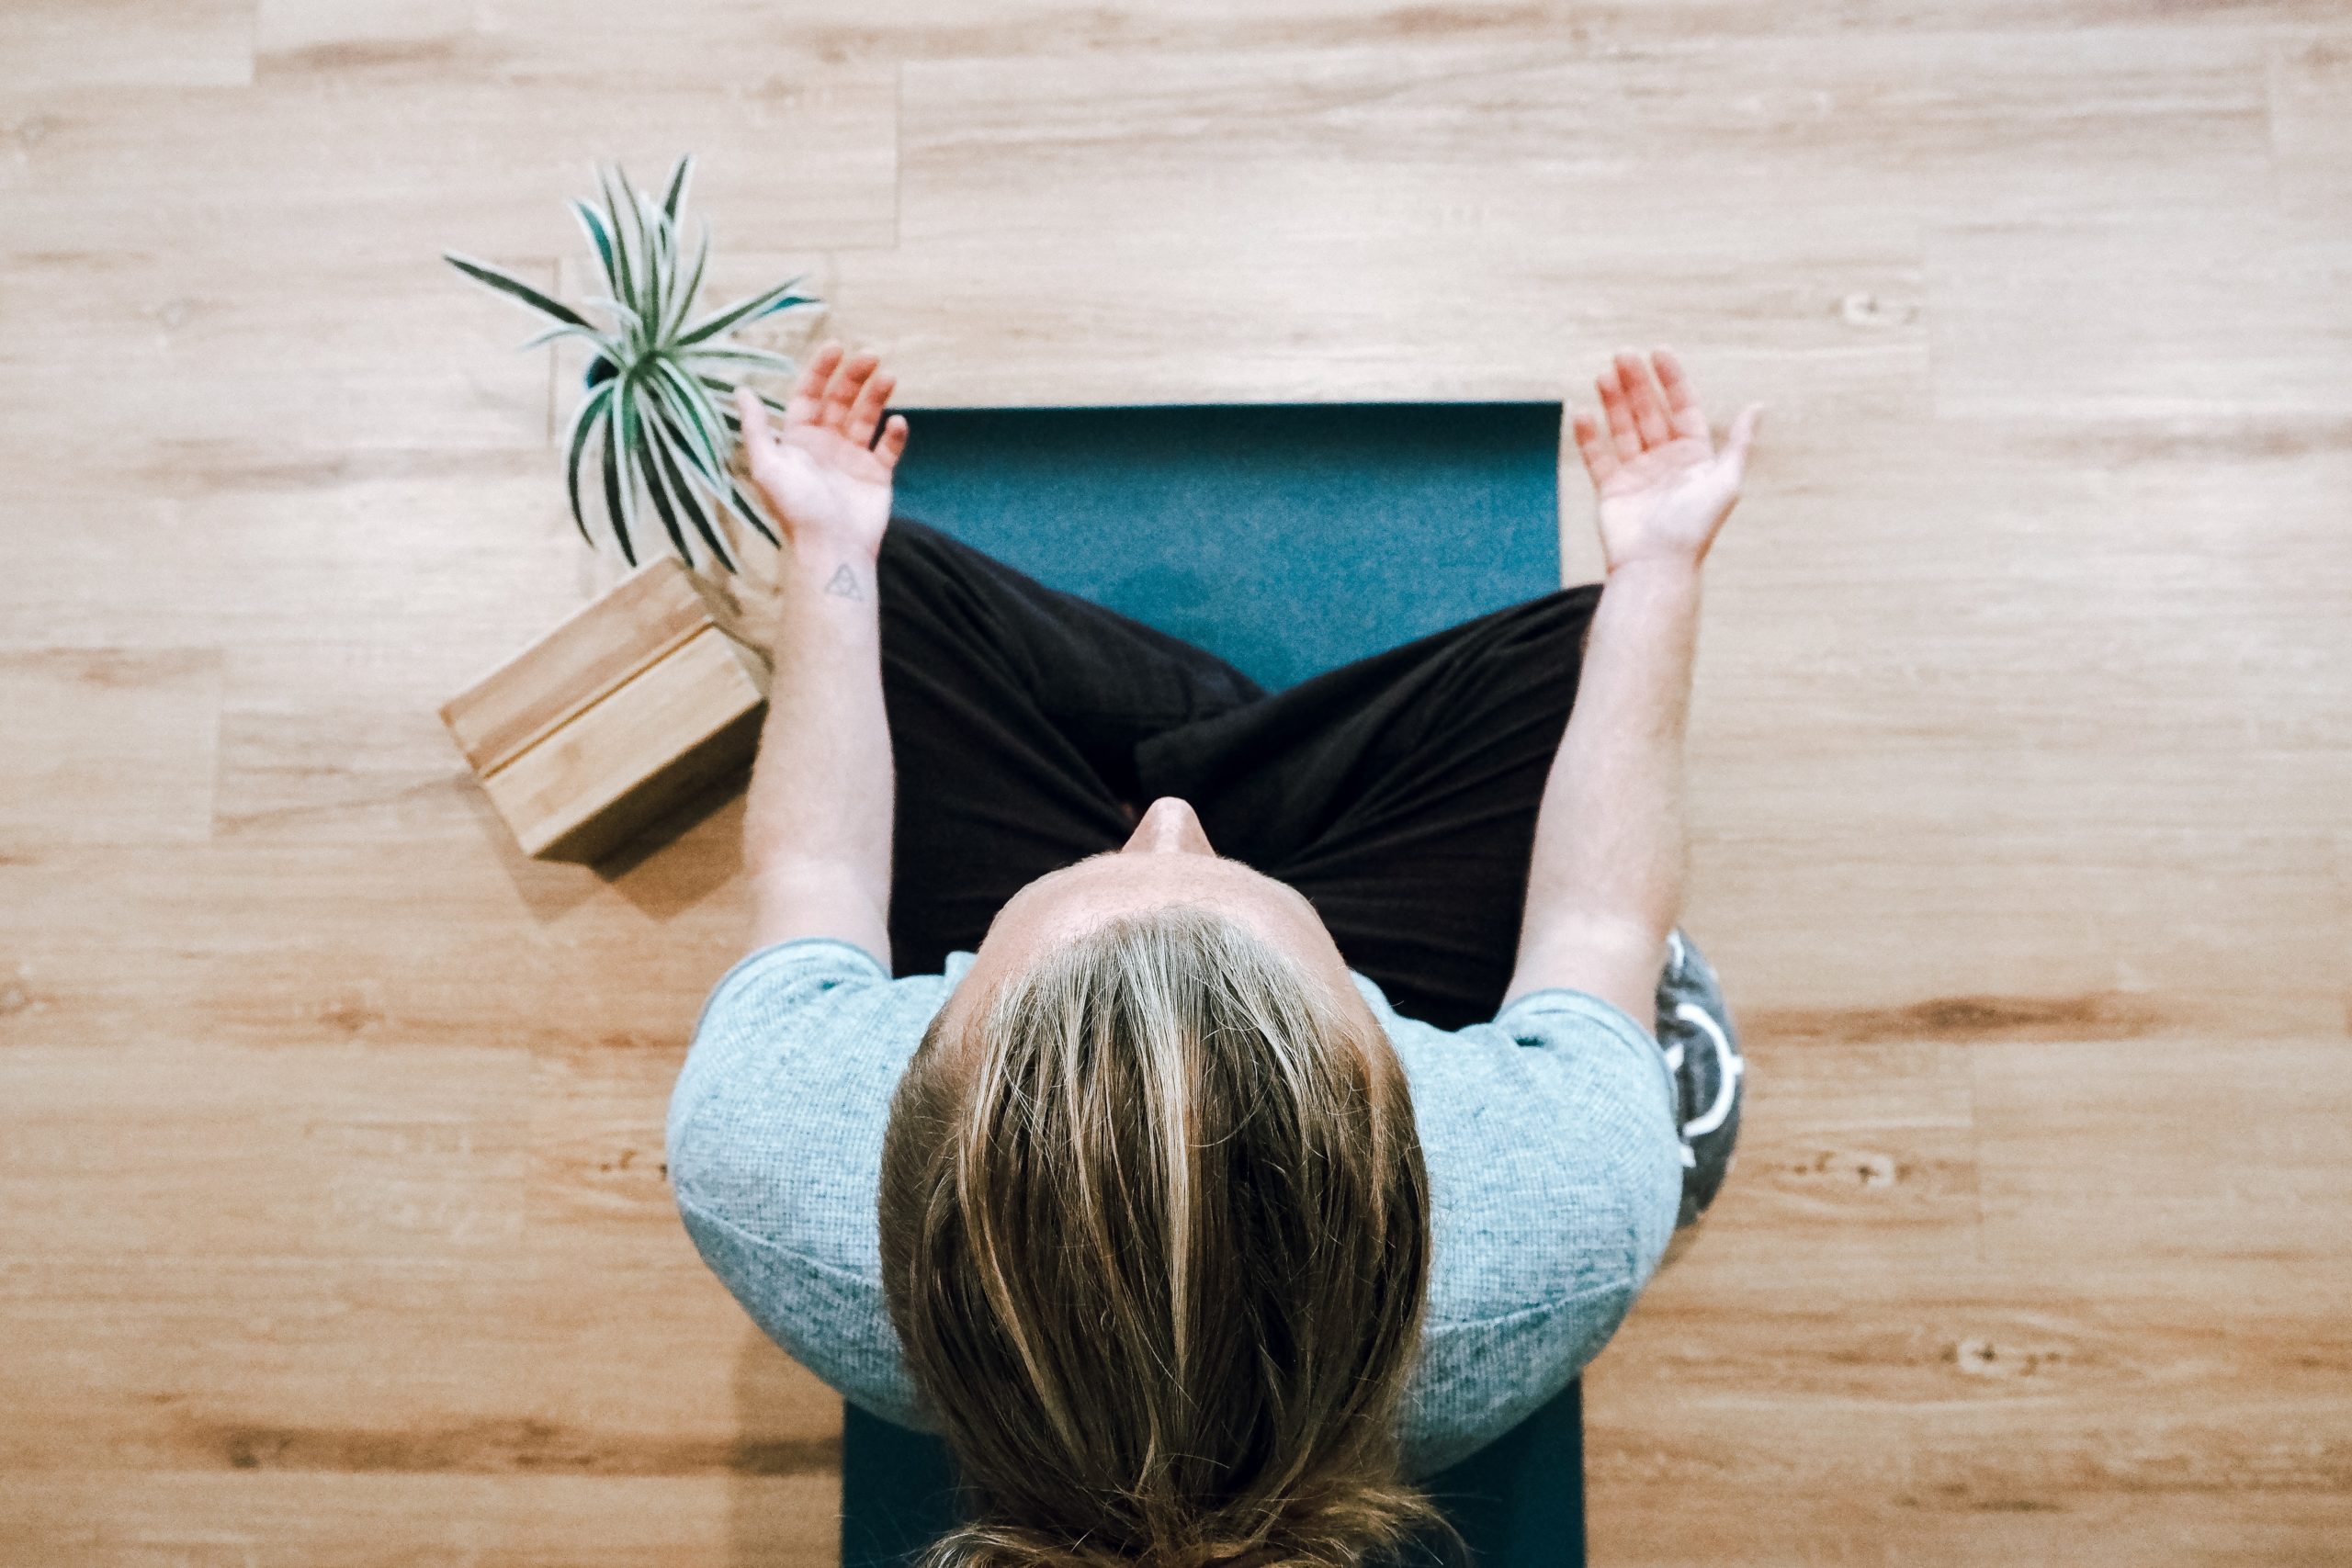 4 Tips to Develop a Mindfulness Practice that Works for You